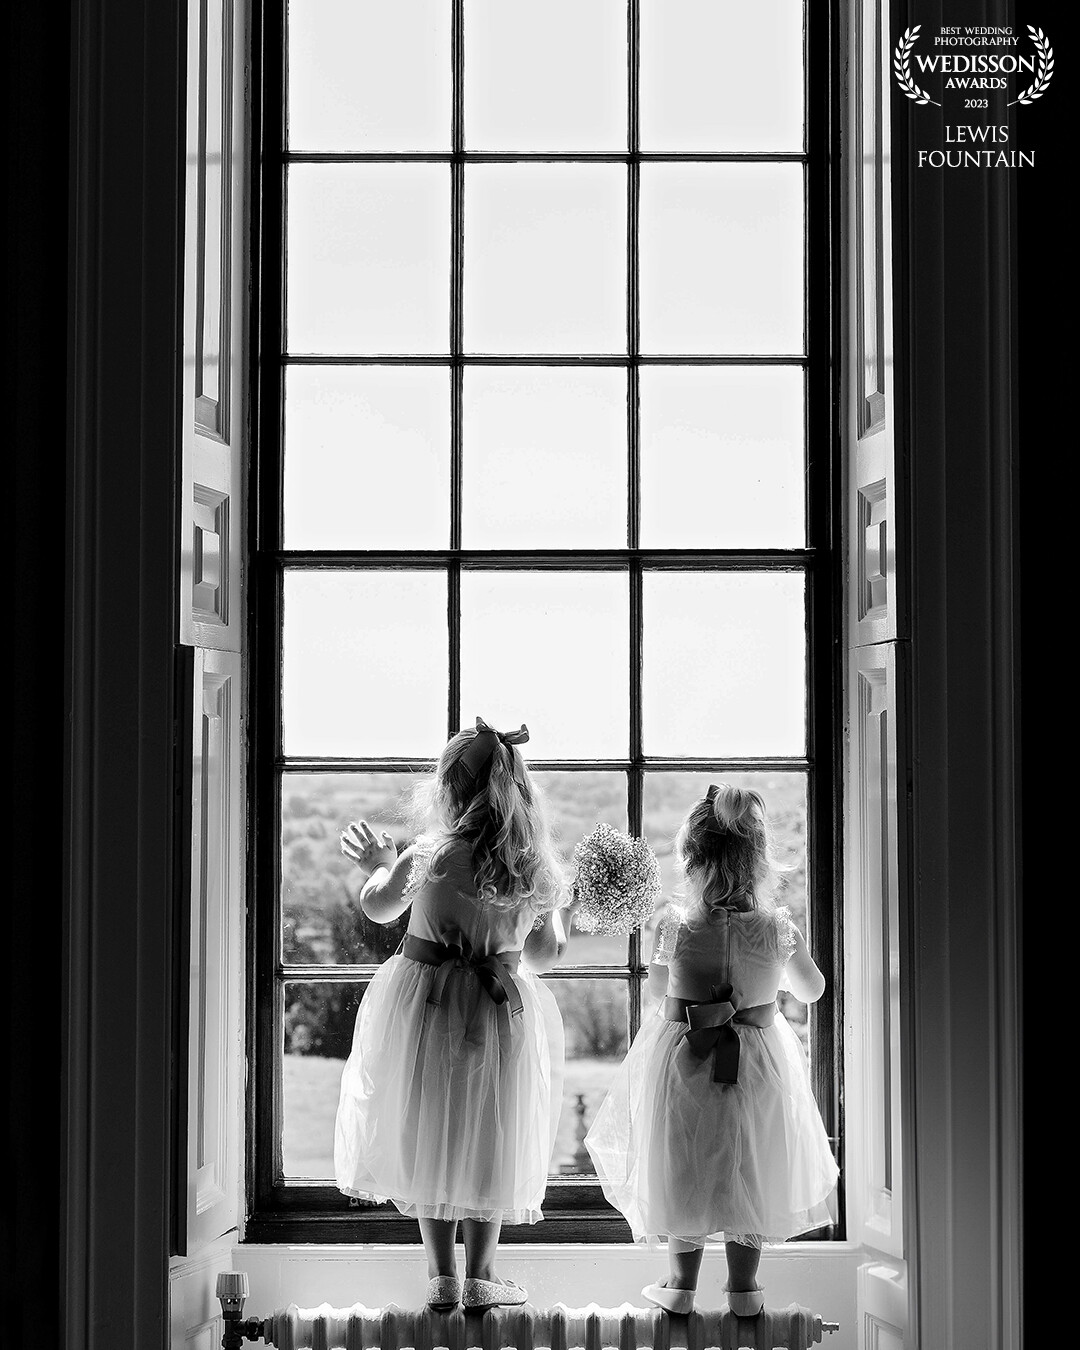 You’ve got to love flower girls at a wedding, they are so spontaneous and always make us chuckle 🤭 <br />
<br />
This pair just couldn’t resist catching the attention of all the wedding guests waiting for the ceremony to start ❤️